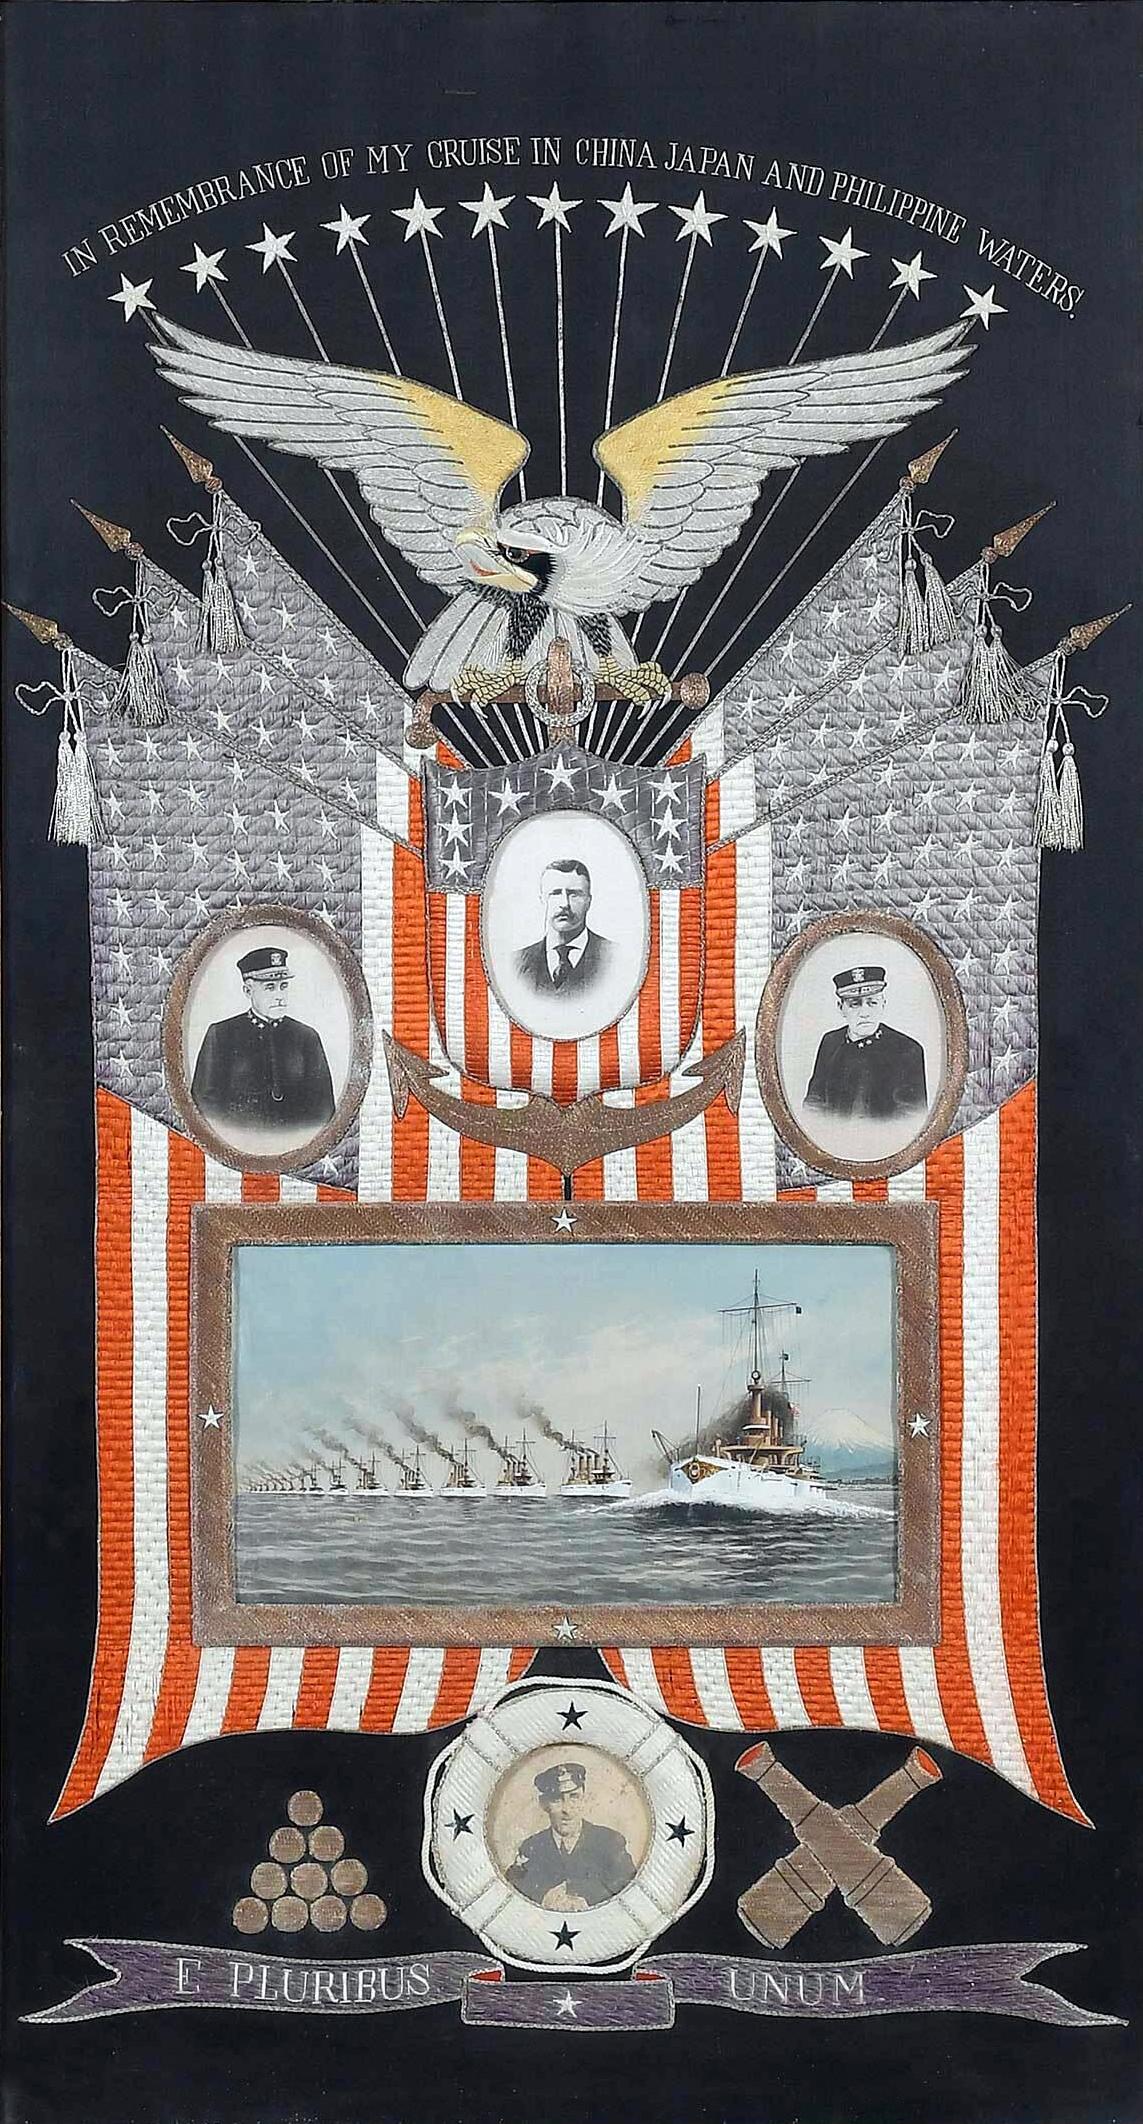 Nicknamed Great White Fleet, the sailing of the United States Navy battleships around the globe from December 16, 1907 to February 22, 1909 by order of United States President Theodore Roosevelt was to make friendly courtesy visits to numerous